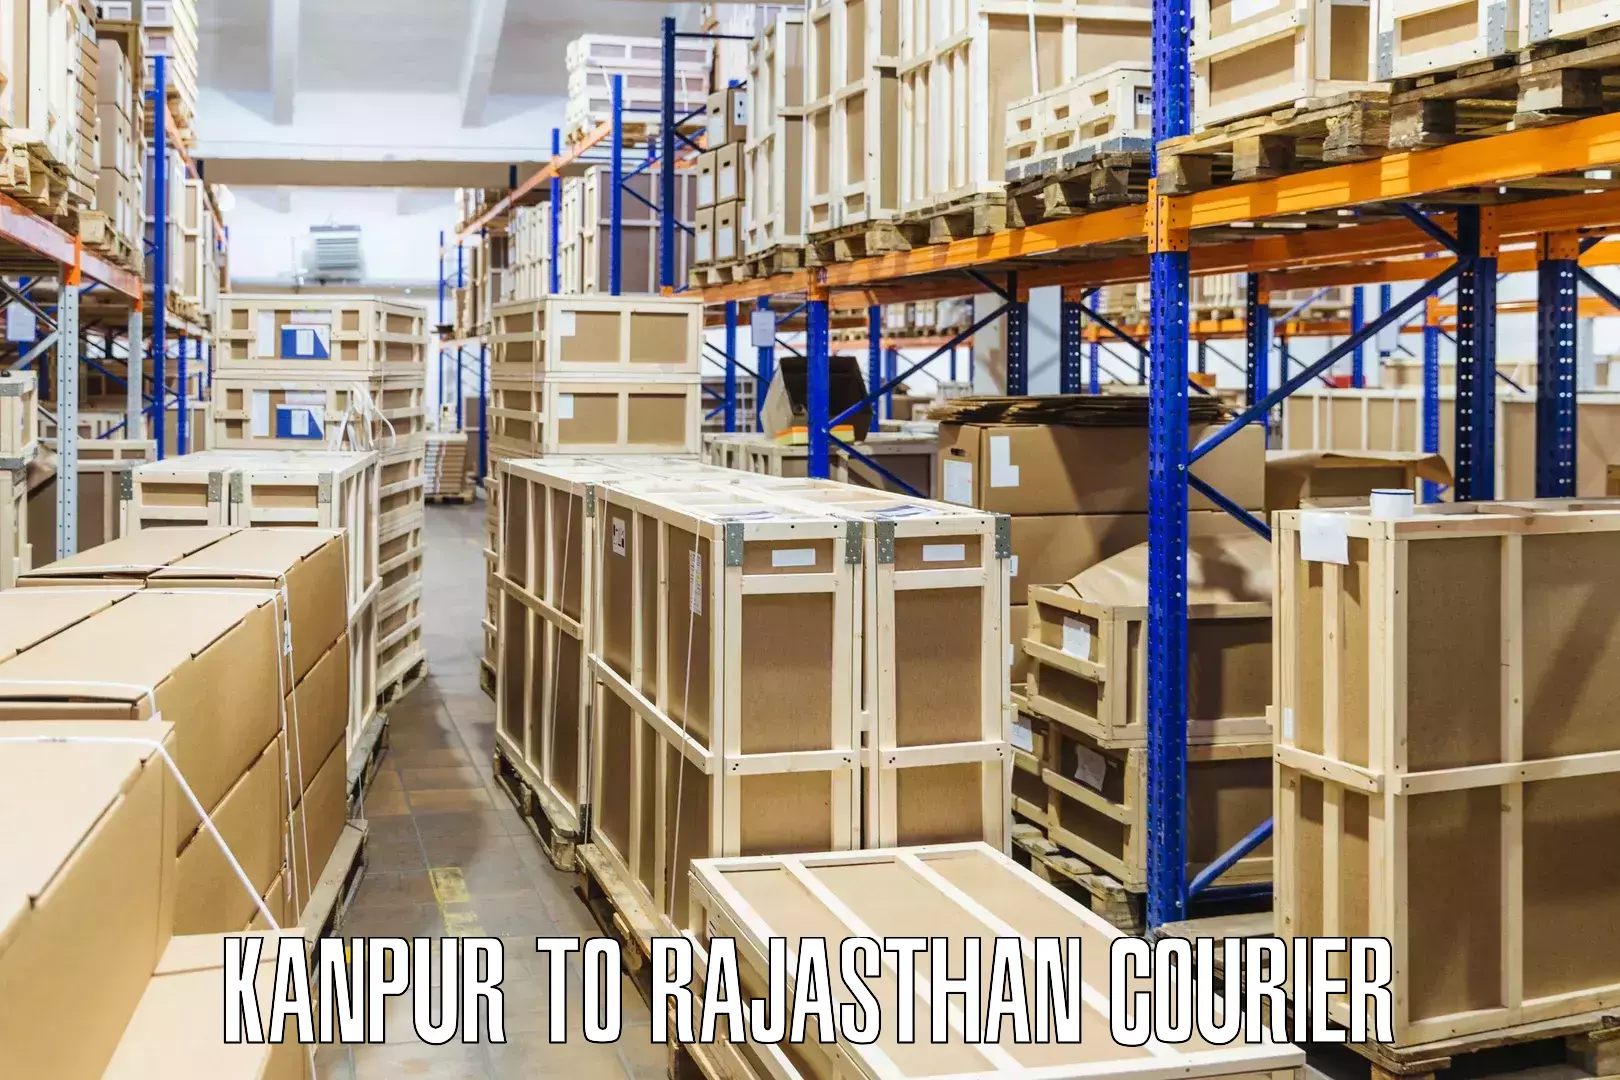 Innovative logistics solutions Kanpur to Bayana